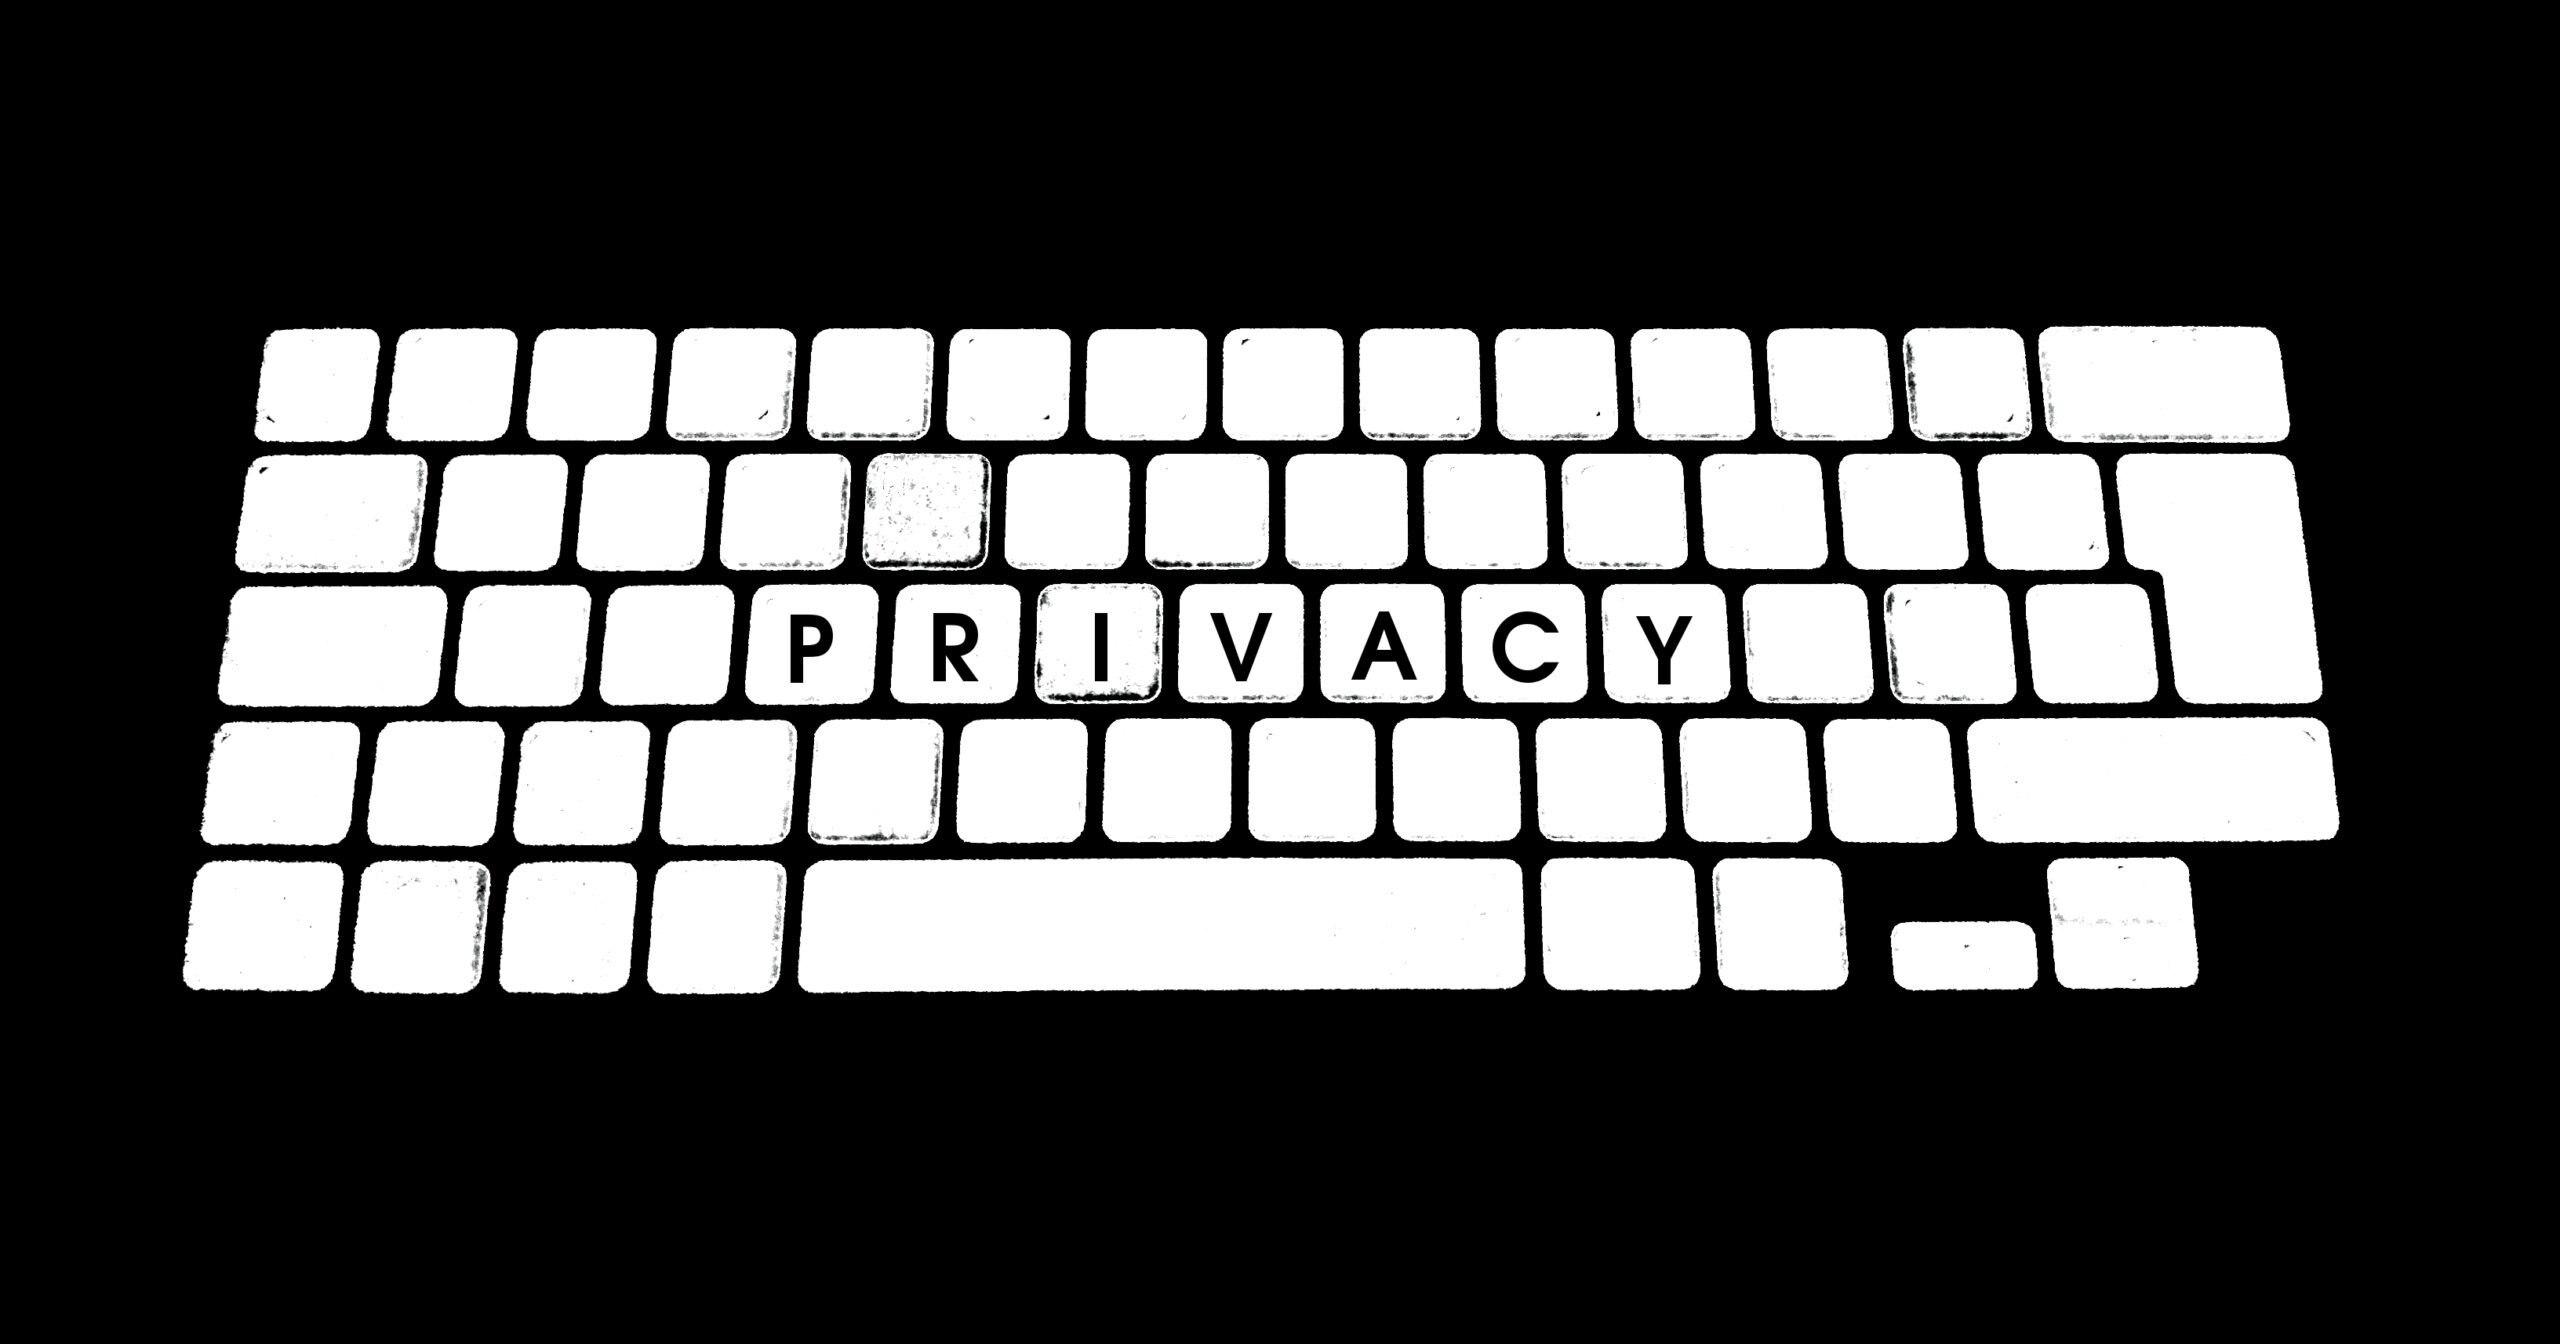 Black background with a white keyboard in the middle. On the white keyboard, the word Privacy is spelled in black text.